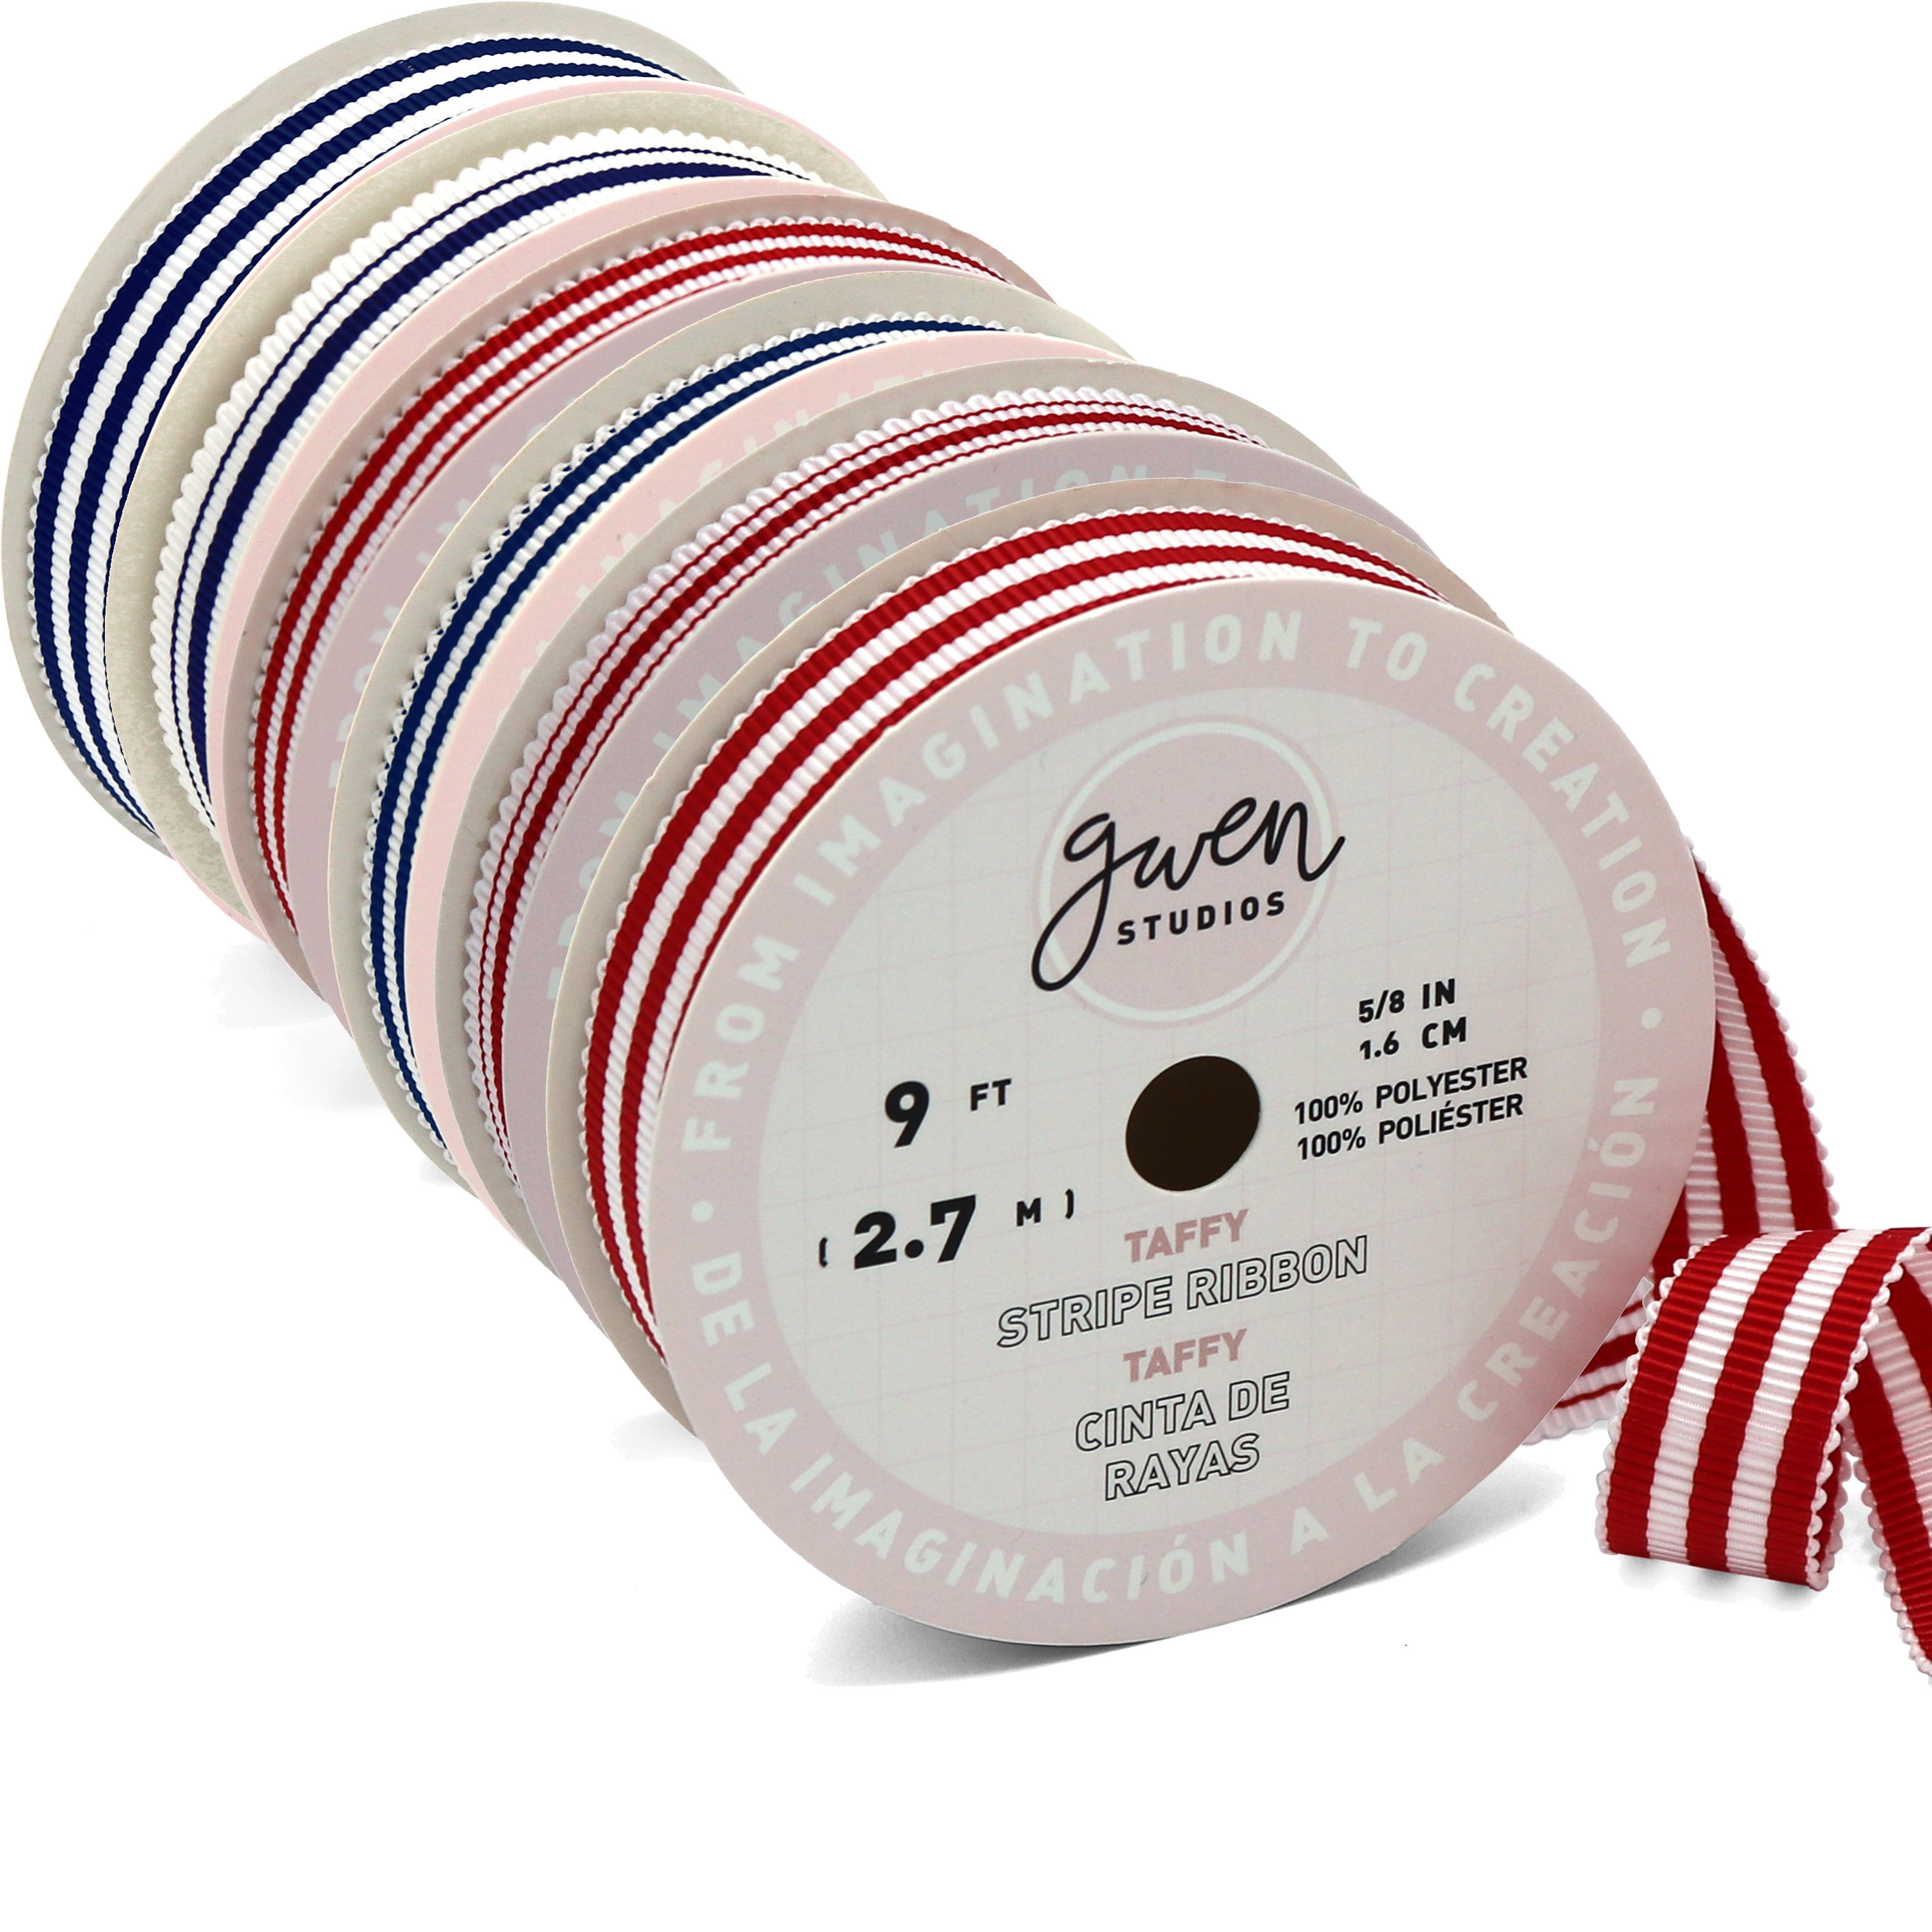 Stripes of red white and blue on 7/8 white grosgrain, 10 Yards